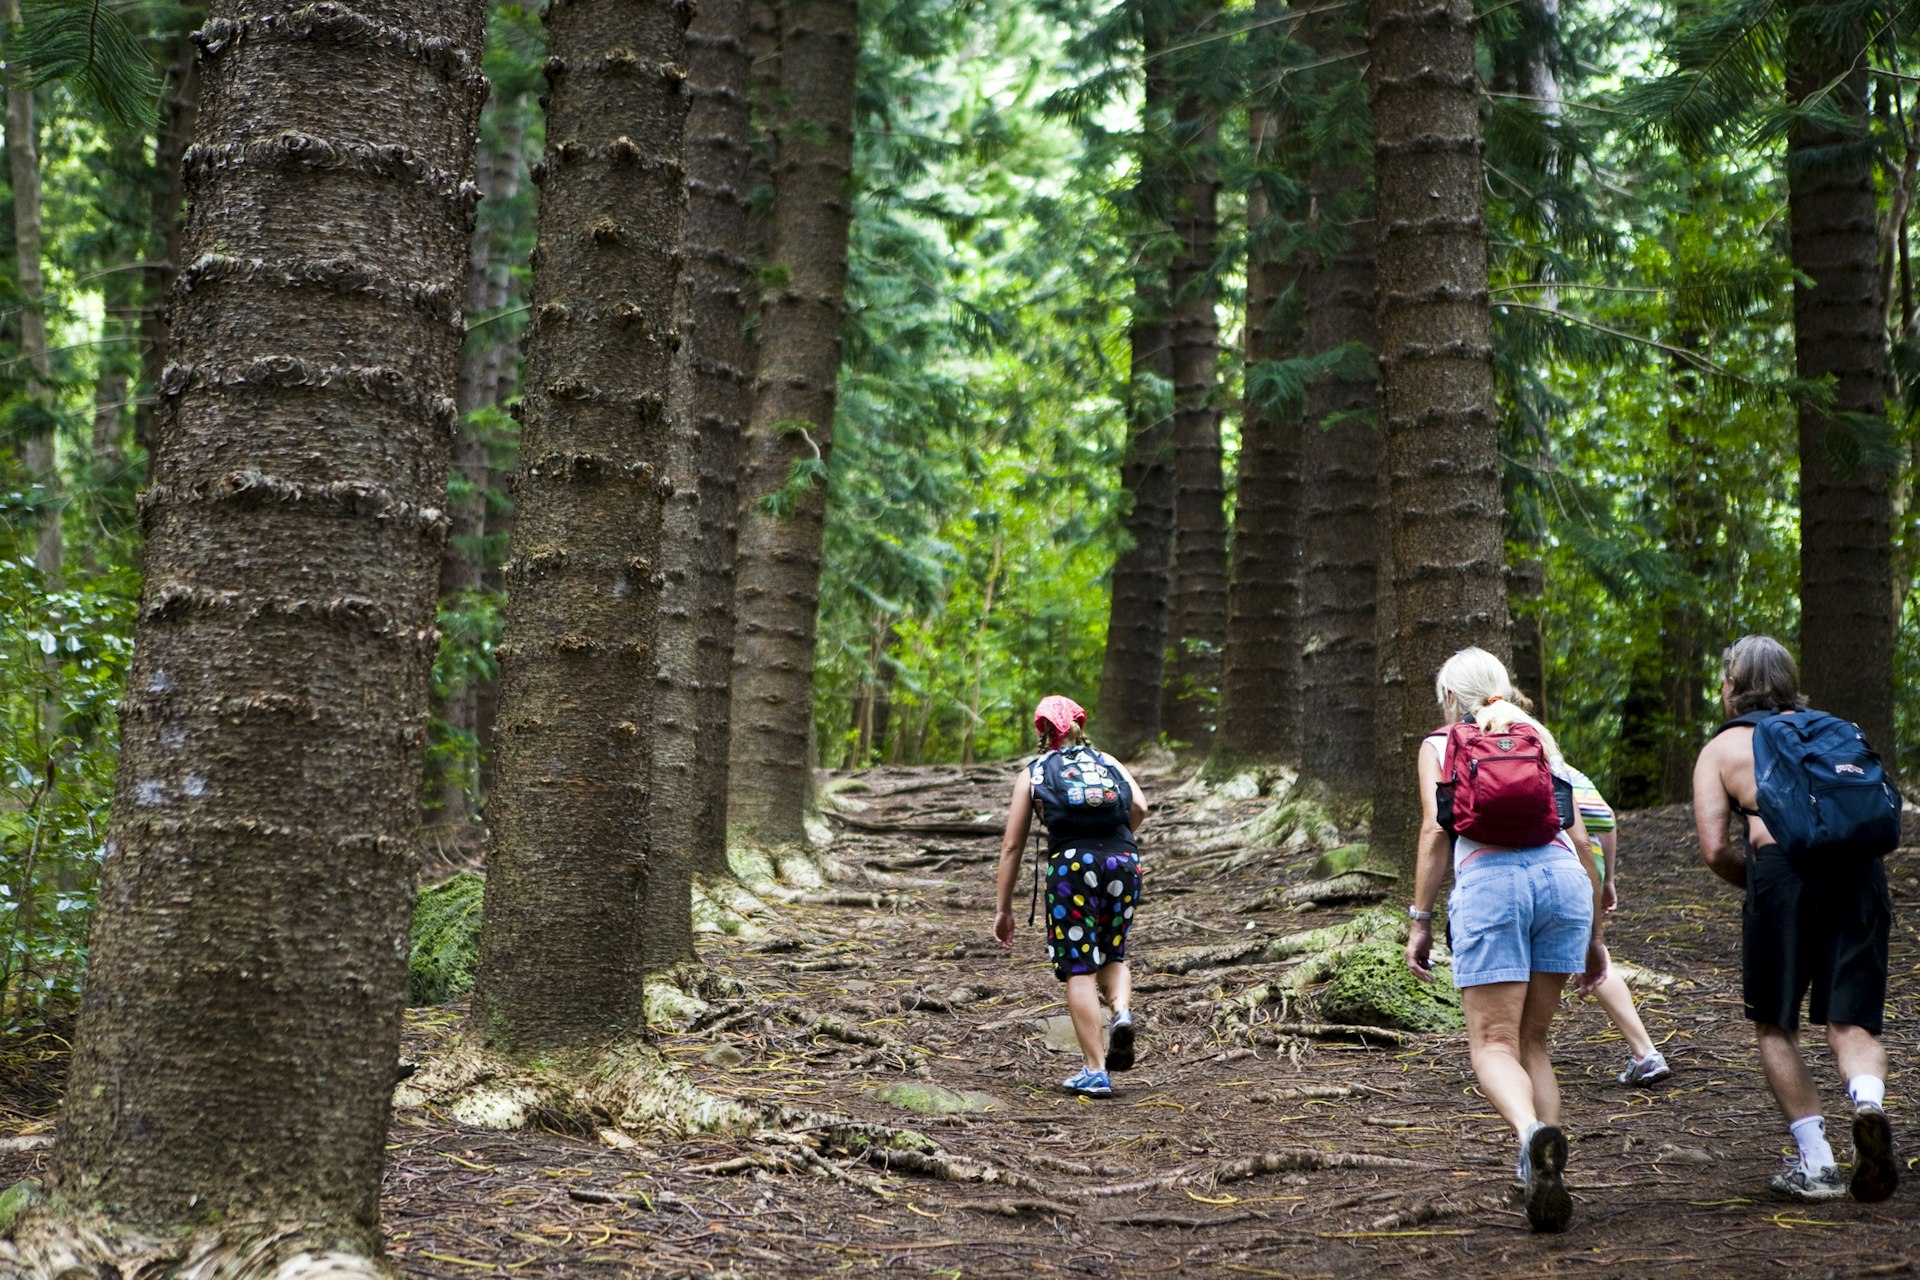 Several women hikers walk through the thick forest on the slopes of Nounou Mountain, Hawaii